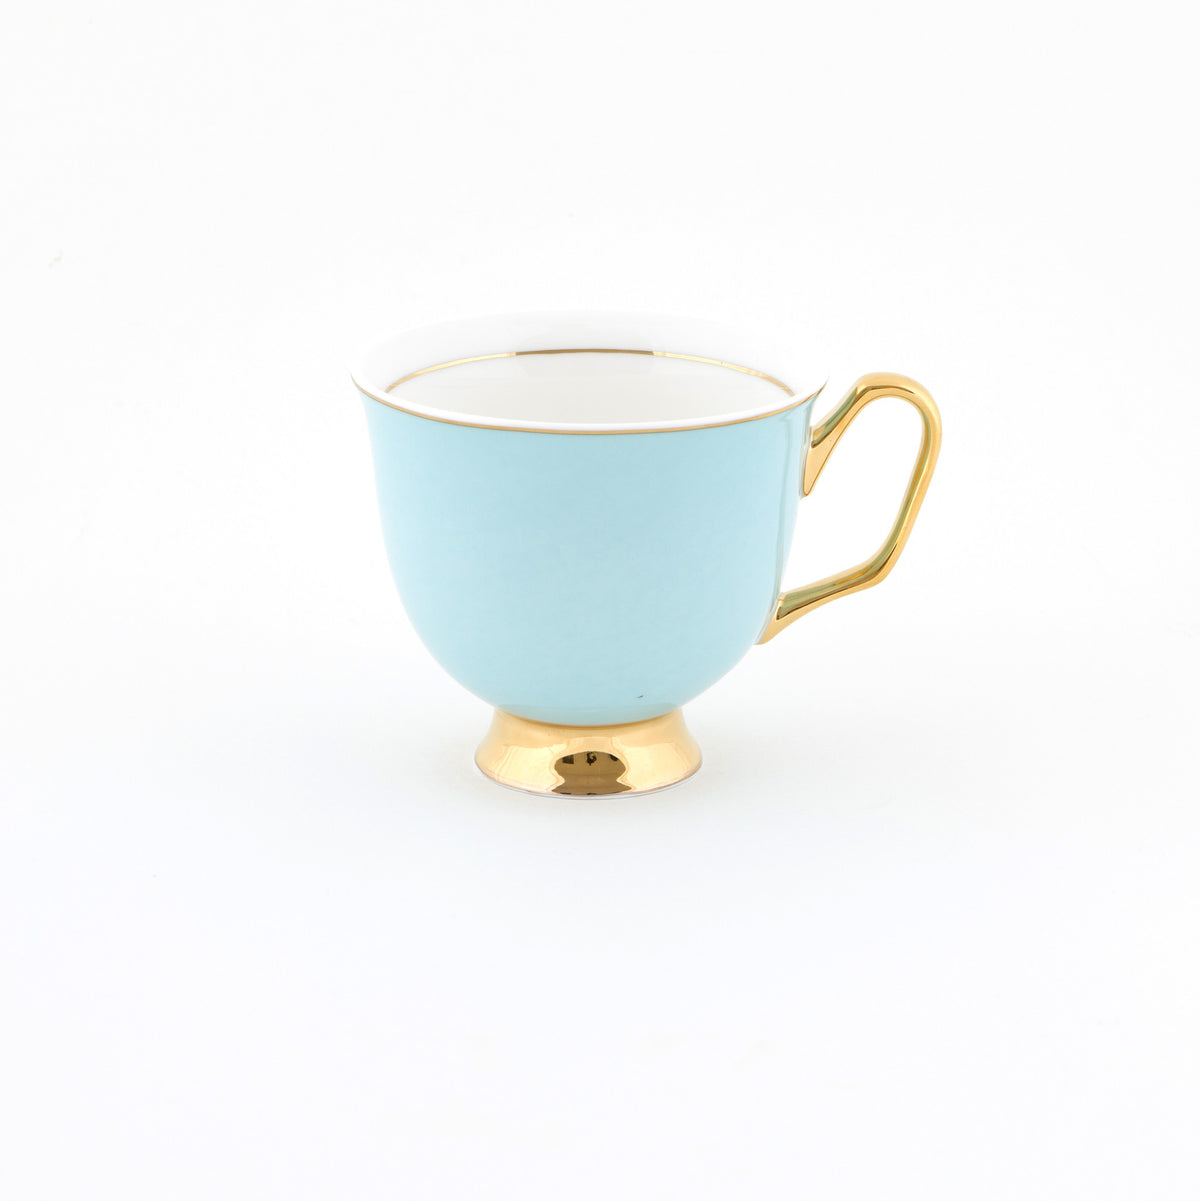 XL Pale Blue Teacup and Saucer